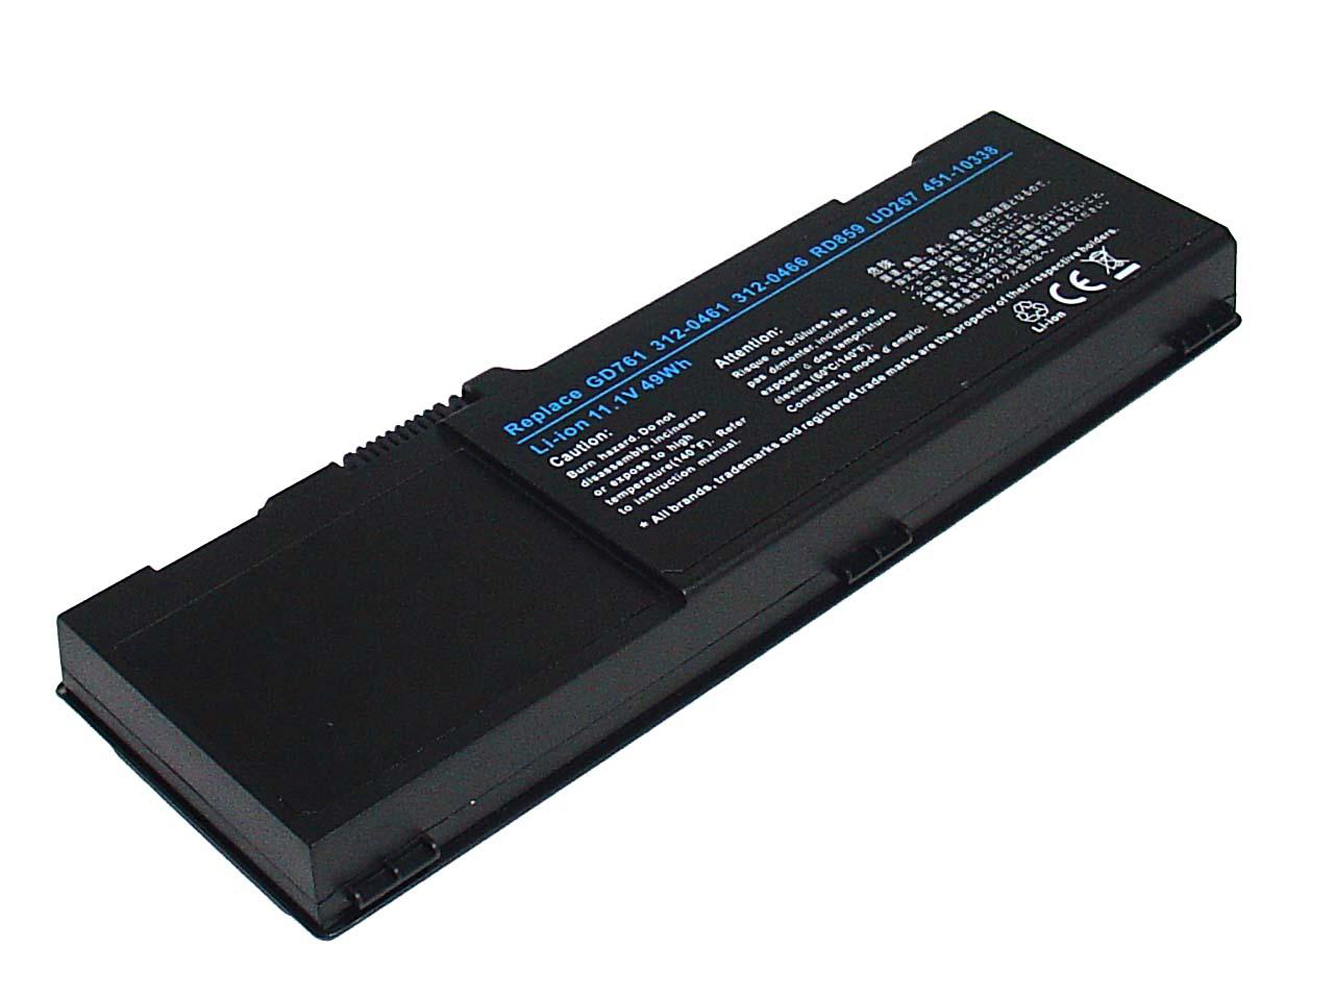 Dell 312-0461, 312-0466 Laptop Batteries For Dell Inspiron 1501, Dell Inspiron 6400 replacement